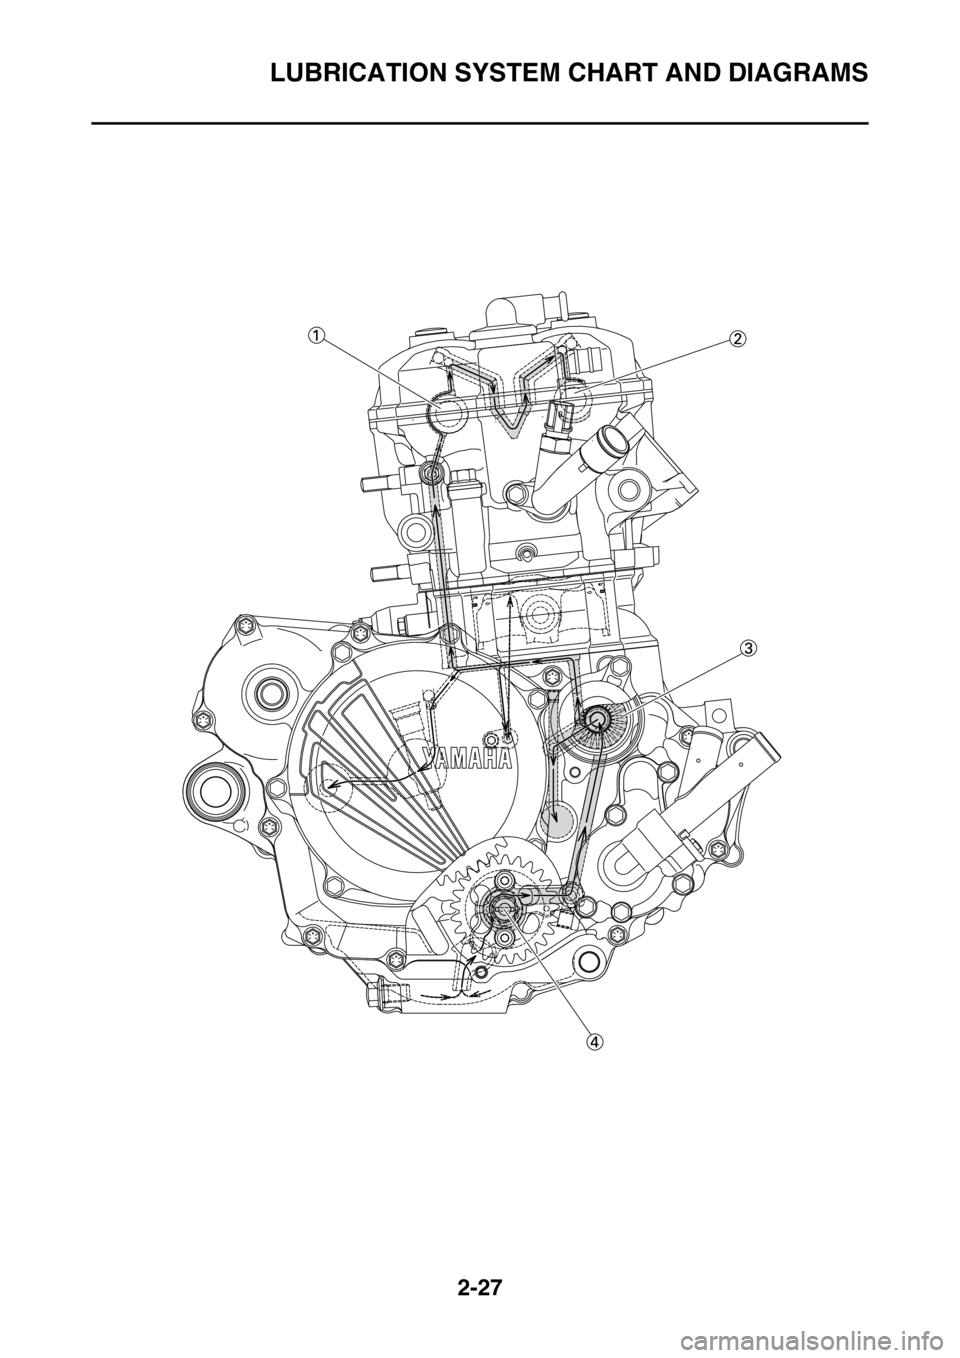 YAMAHA WR 250F 2017  Owners Manual LUBRICATION SYSTEM CHART AND DIAGRAMS
2-27 